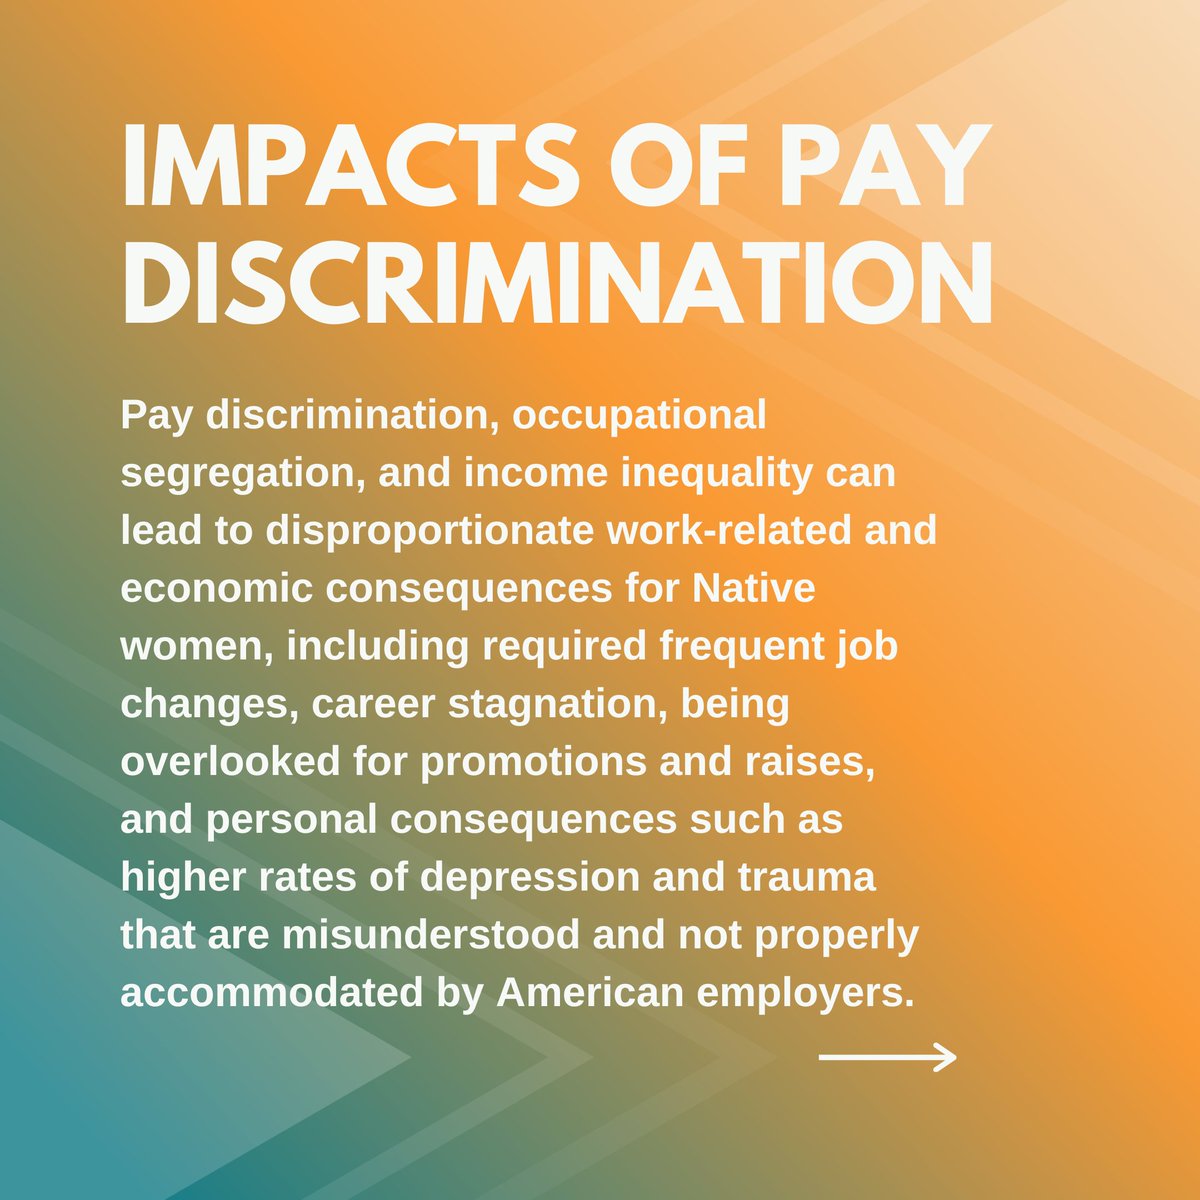 Today is Native Women's Equal Pay Day. So let's talk about it✨
#EquityForNativeWomen requires #NativeWomensEqualPay & an end to systemic violence, poverty & healthcare disparities, justice for #MMIW, & more. Only with full equity can we end racism-based economic injustice.